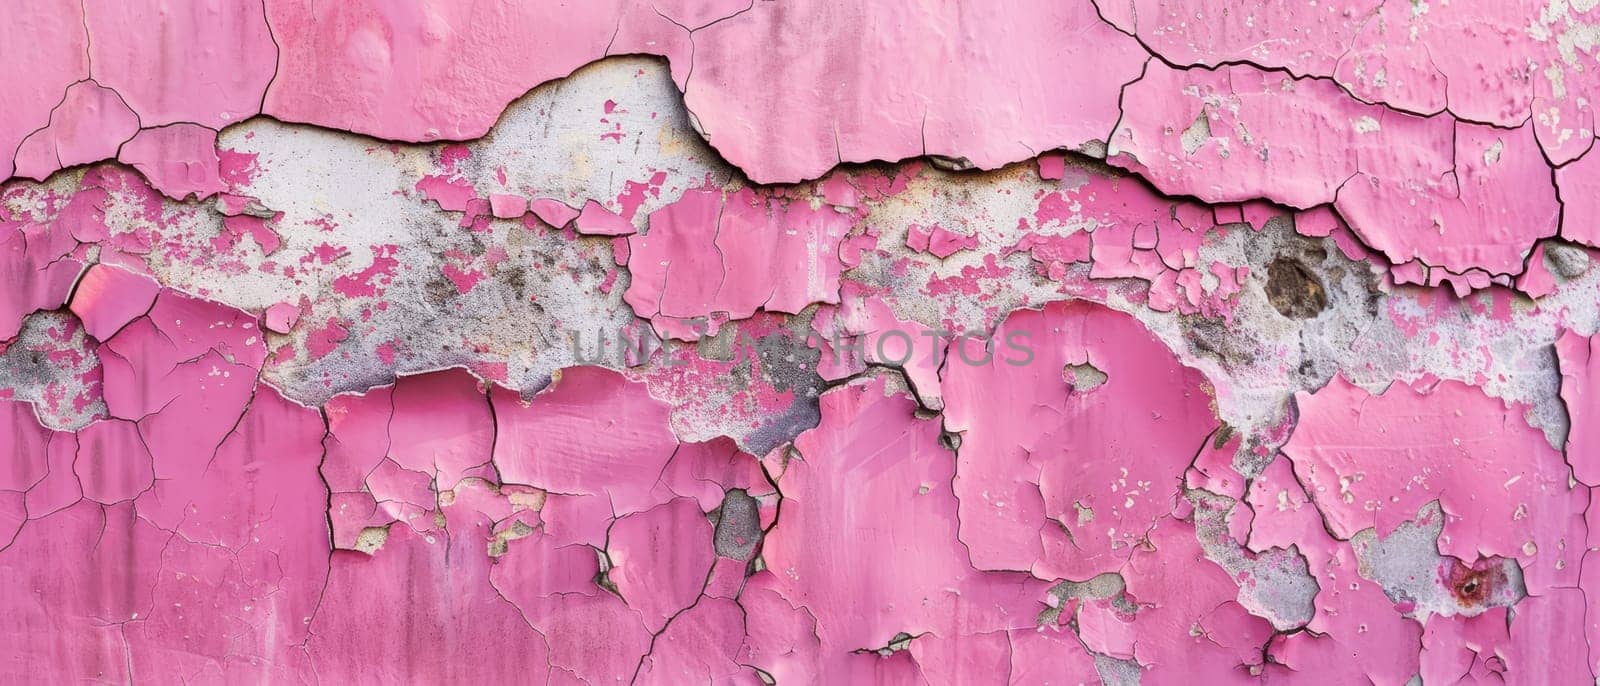 This panoramic image captures the wide expanse of pink decay, where the paint's retreat creates an organic tapestry of weathering and wear